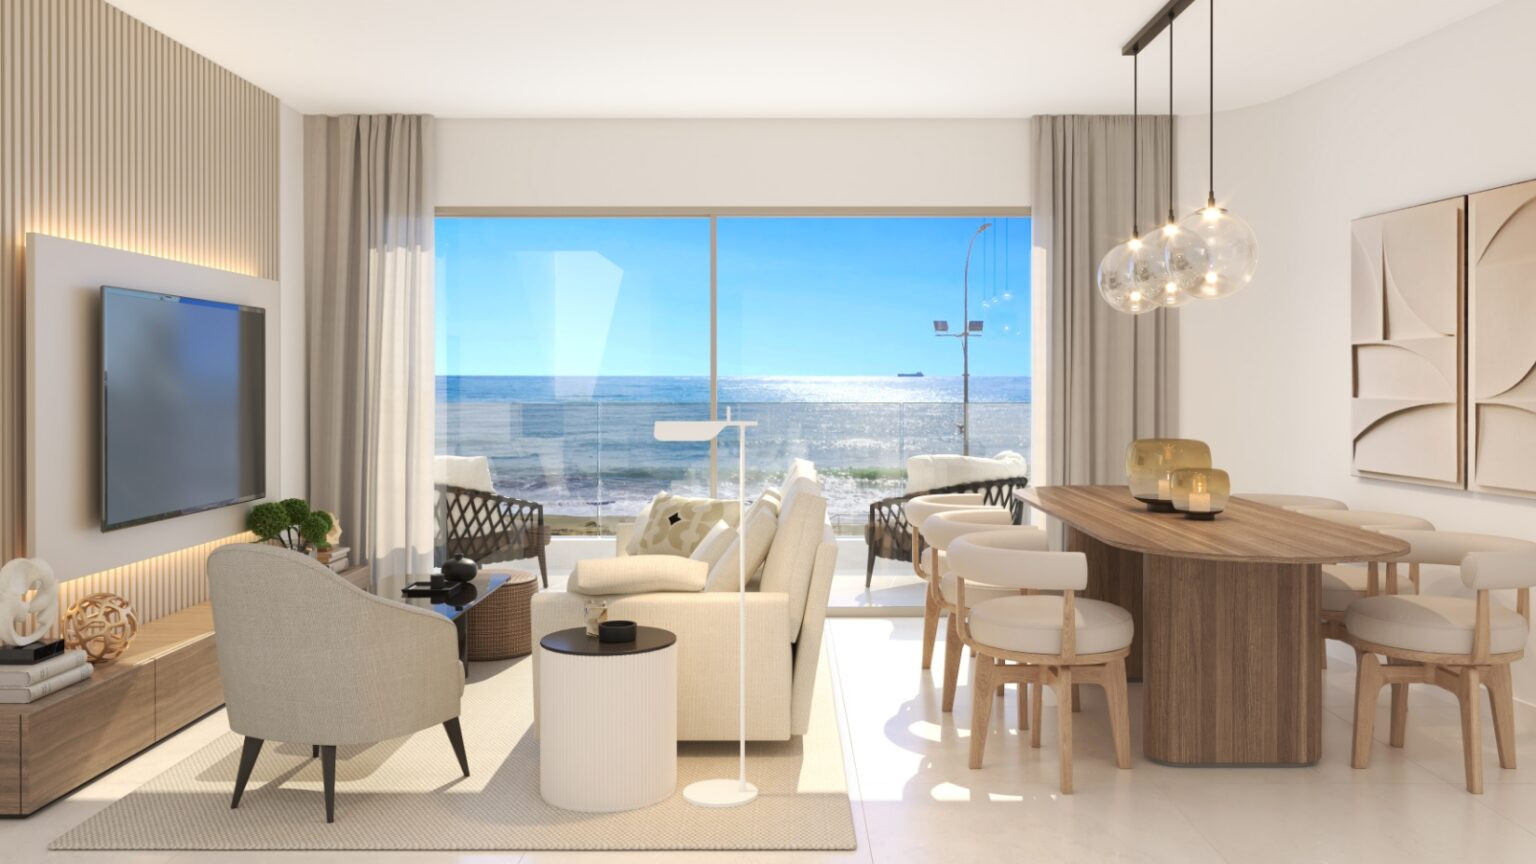 Idris 6 View: Exclusive beachfront properties in the city of Malaga. | Image 5